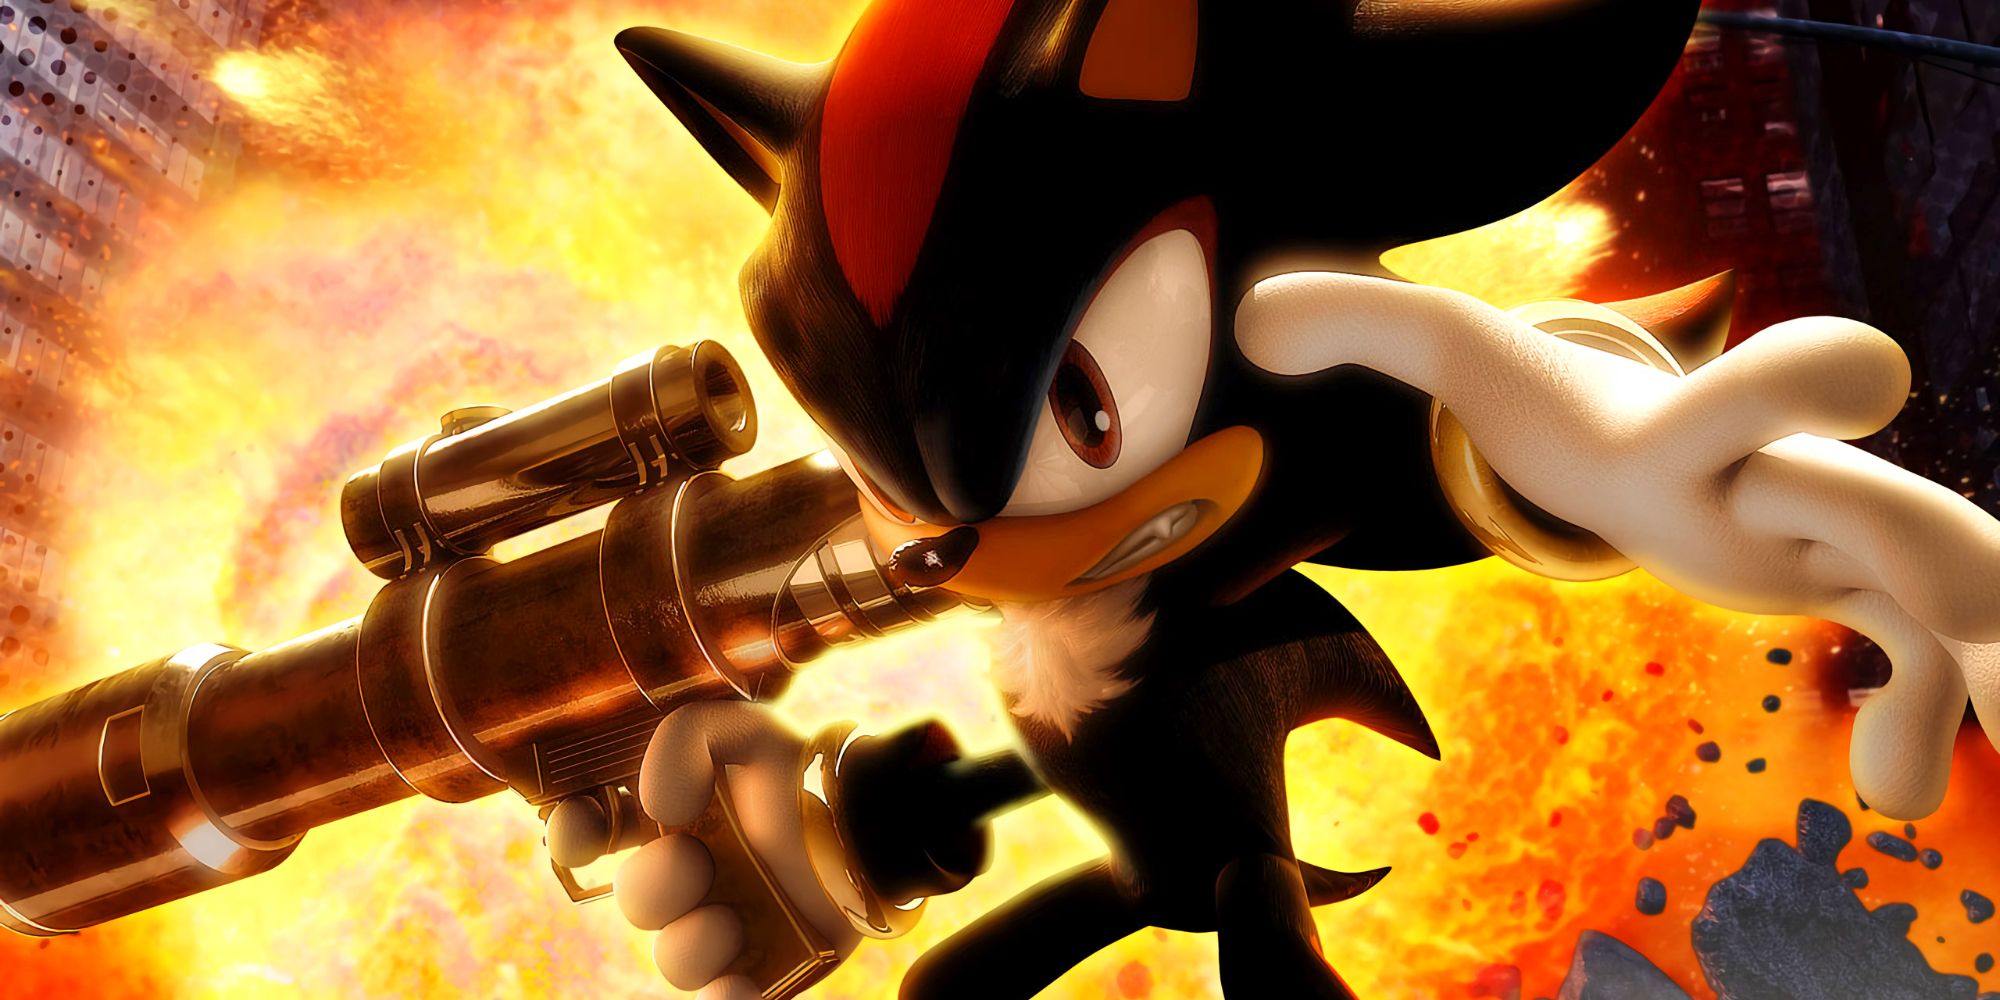 Official artwork for the Shadow the Hedgehog game.